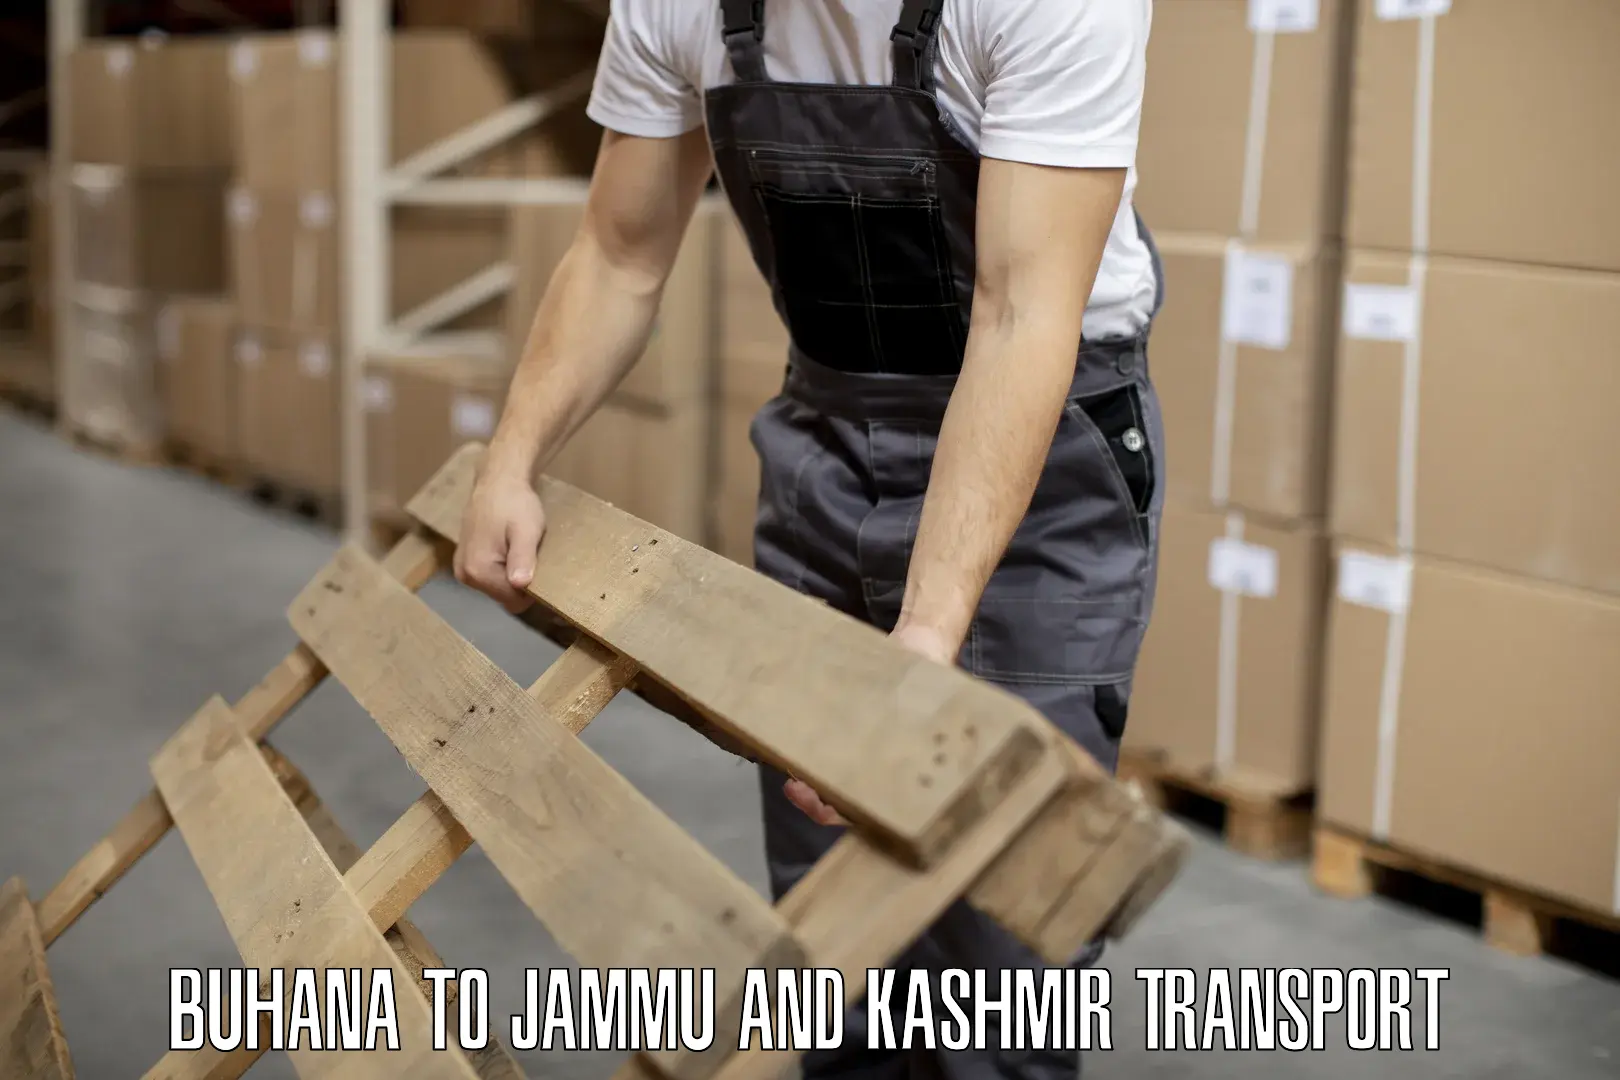 Truck transport companies in India Buhana to Udhampur